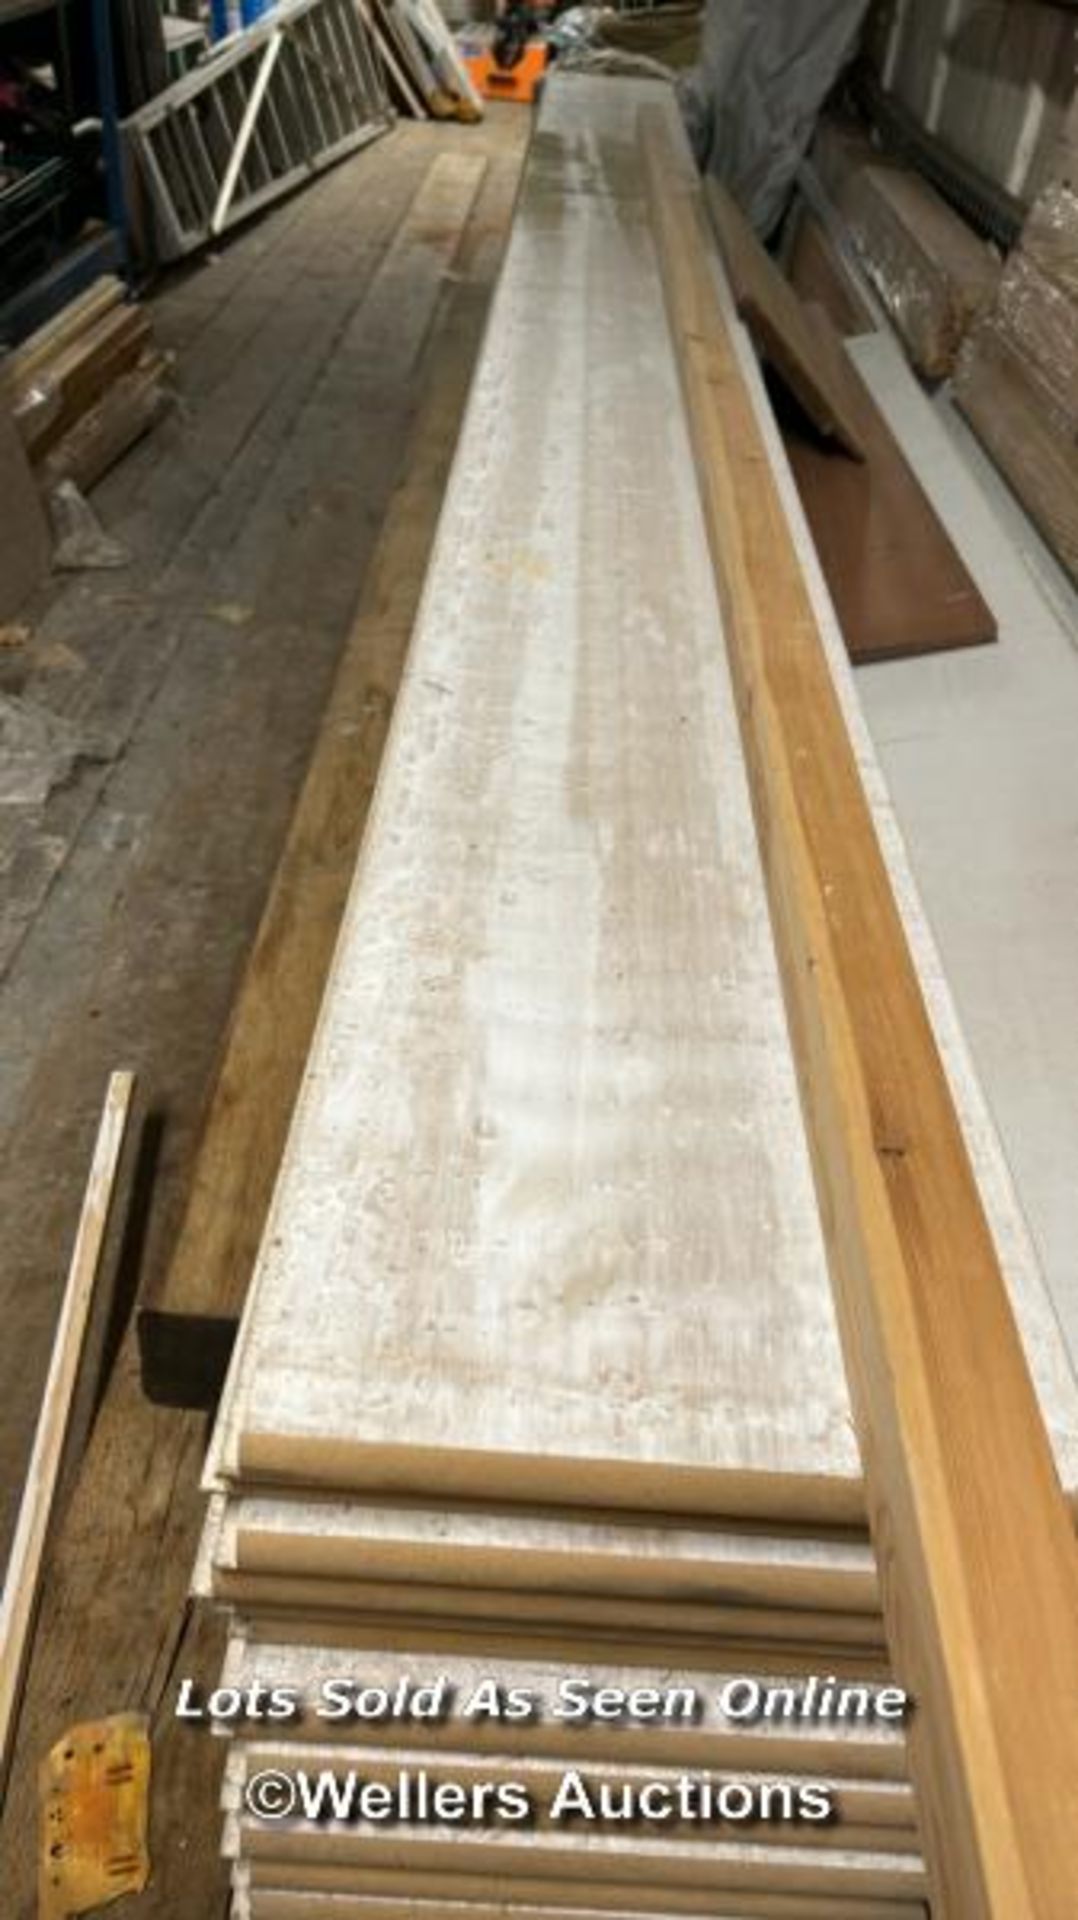 21X NEW PRIMED MDF WINDOW BOARDS, 3.6M (L) X 290CM (W) X 2.8CM (D) - Image 2 of 3